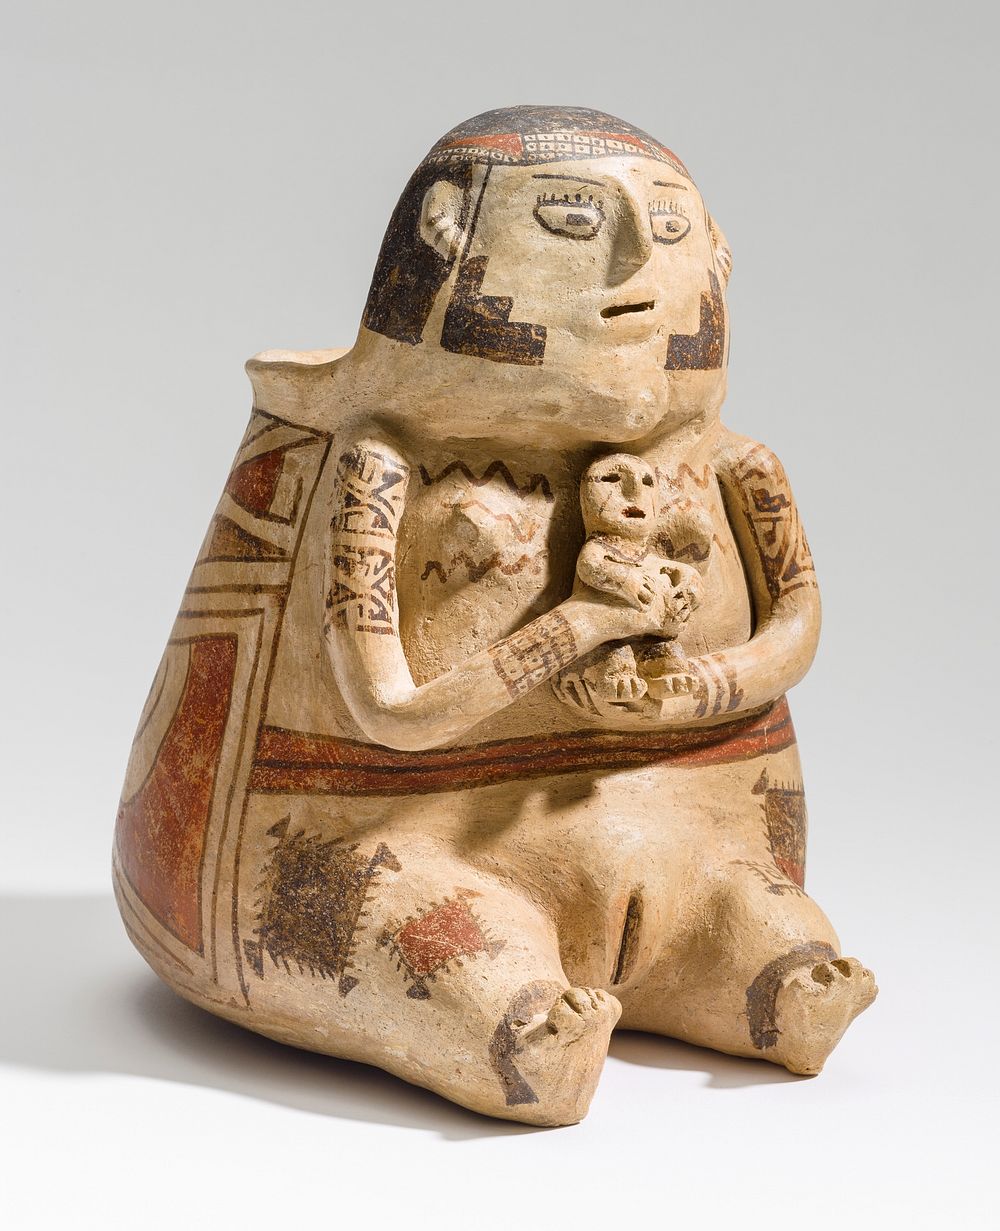 Anthropomorphic Polychrome Effigy Vessel of a Woman with Child